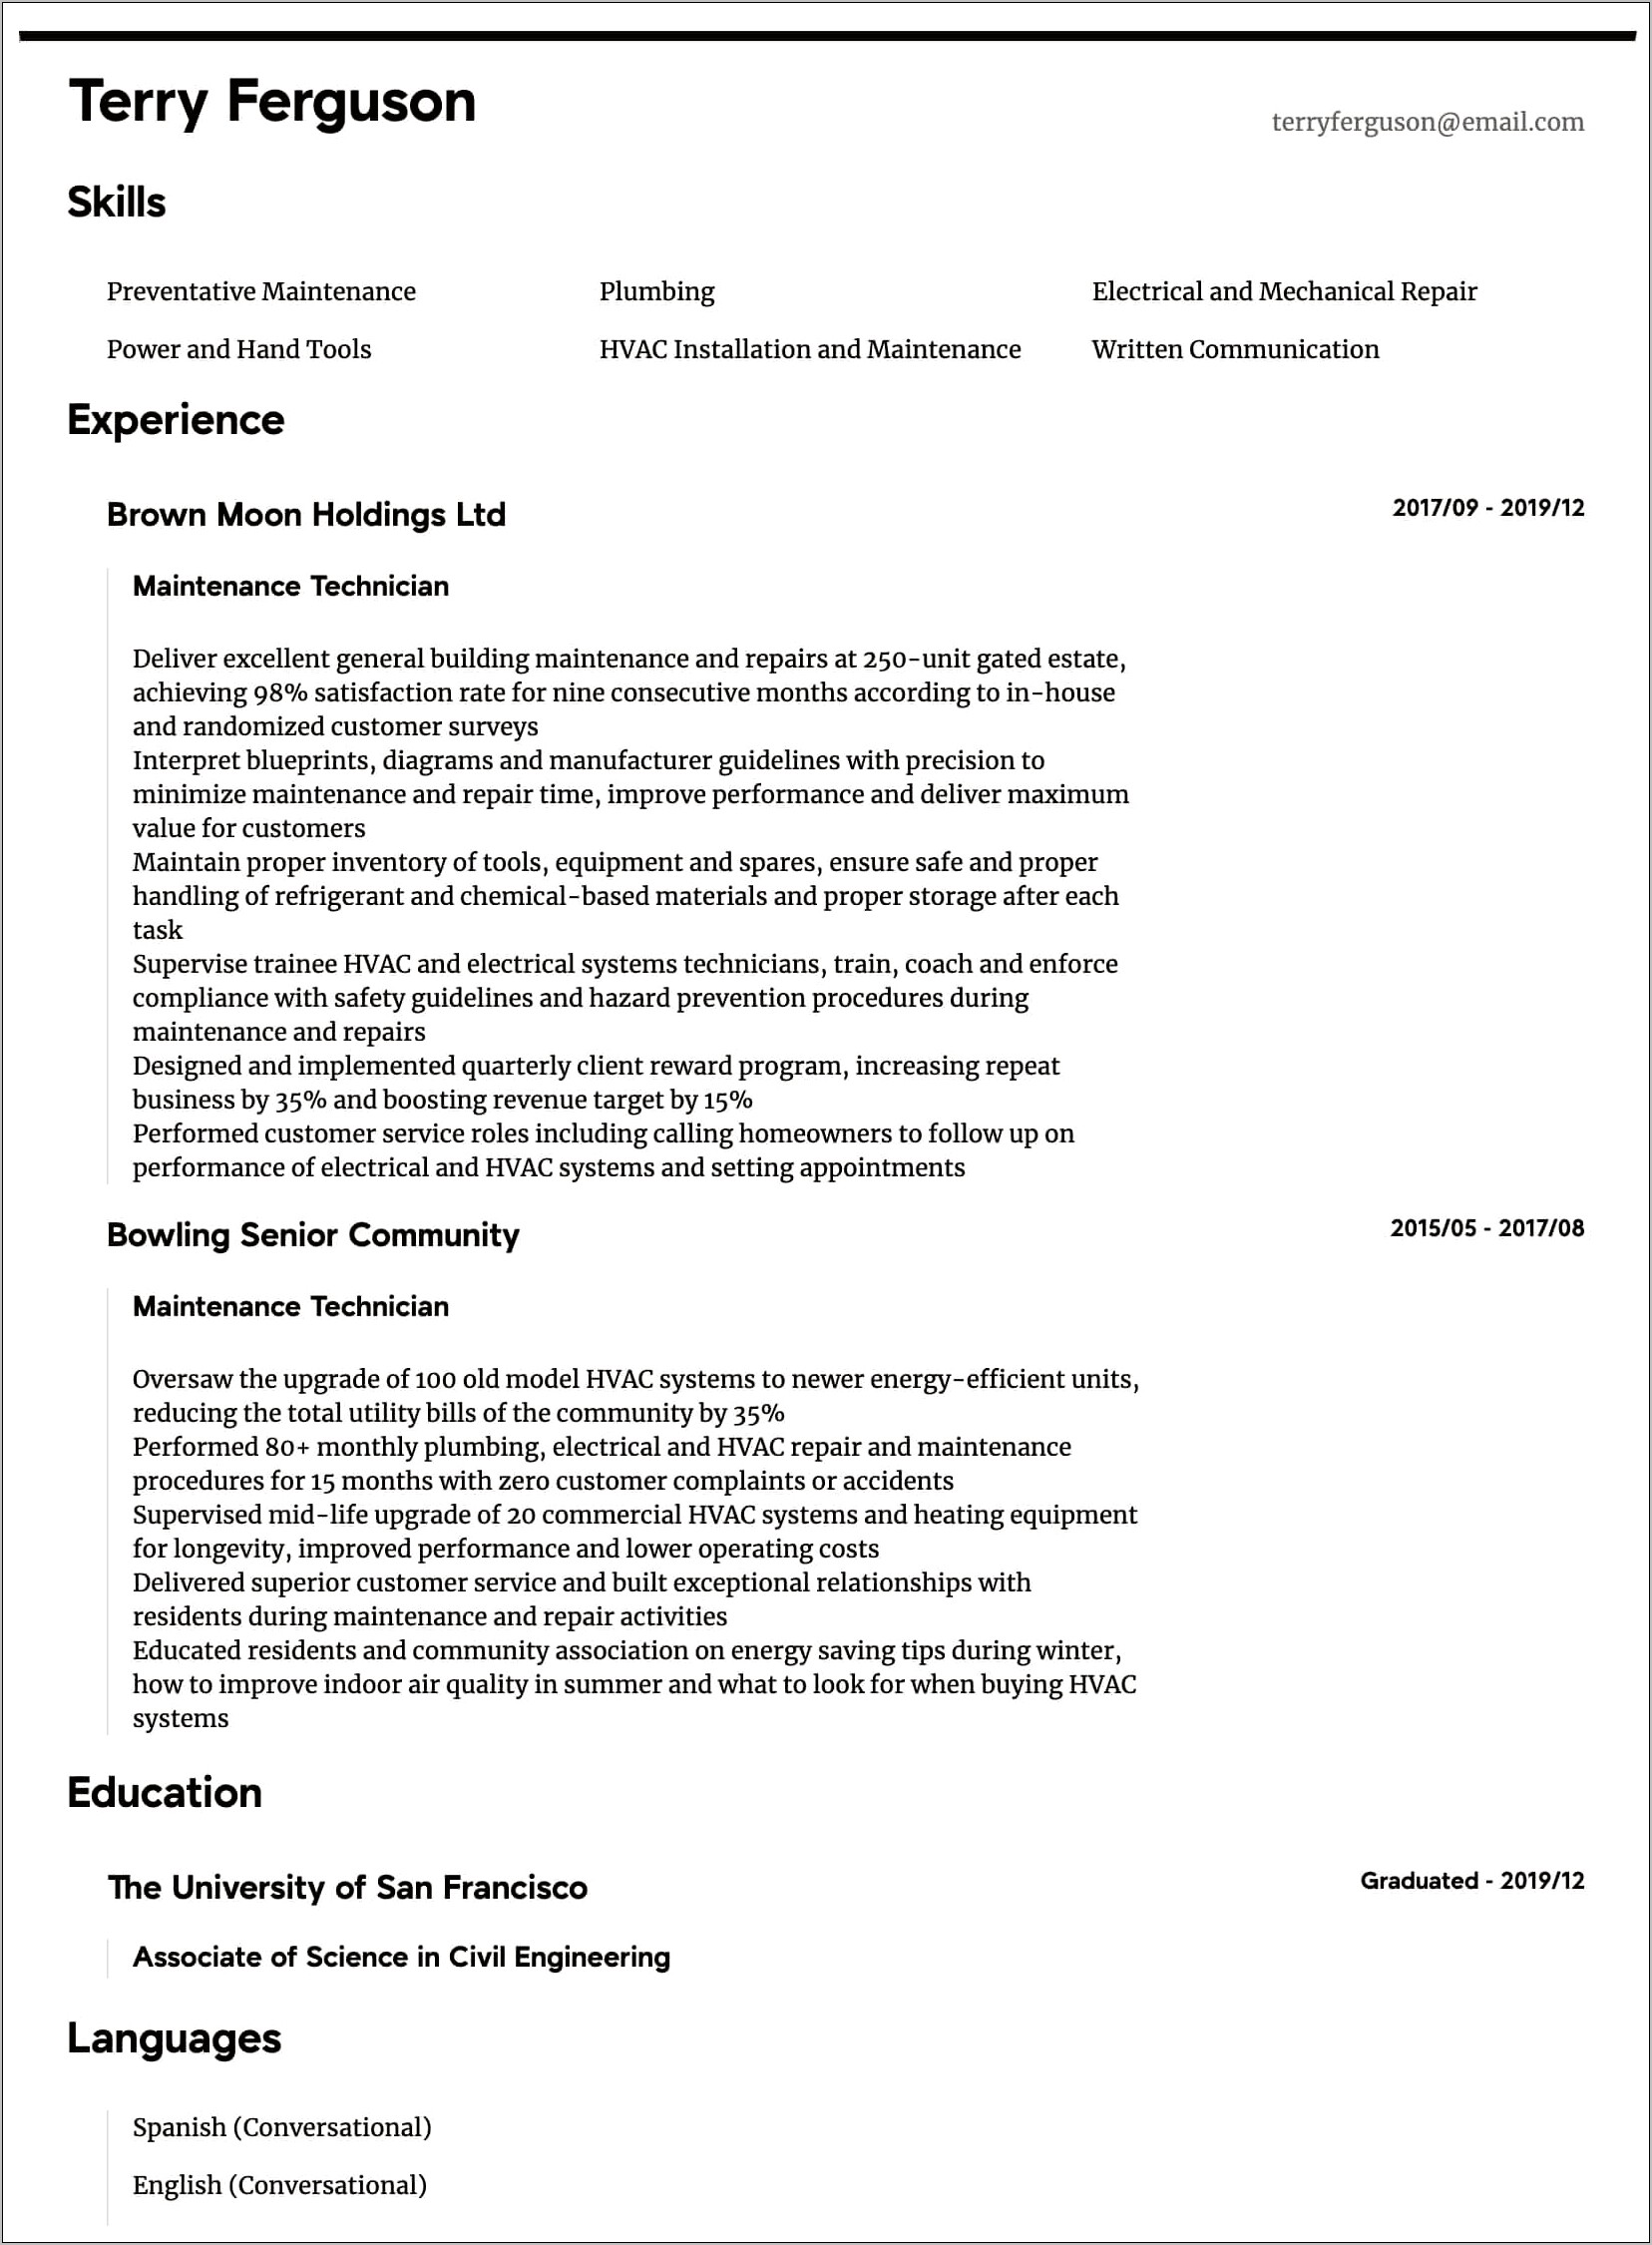 Electrical Installation And Maintenance Resume Sample